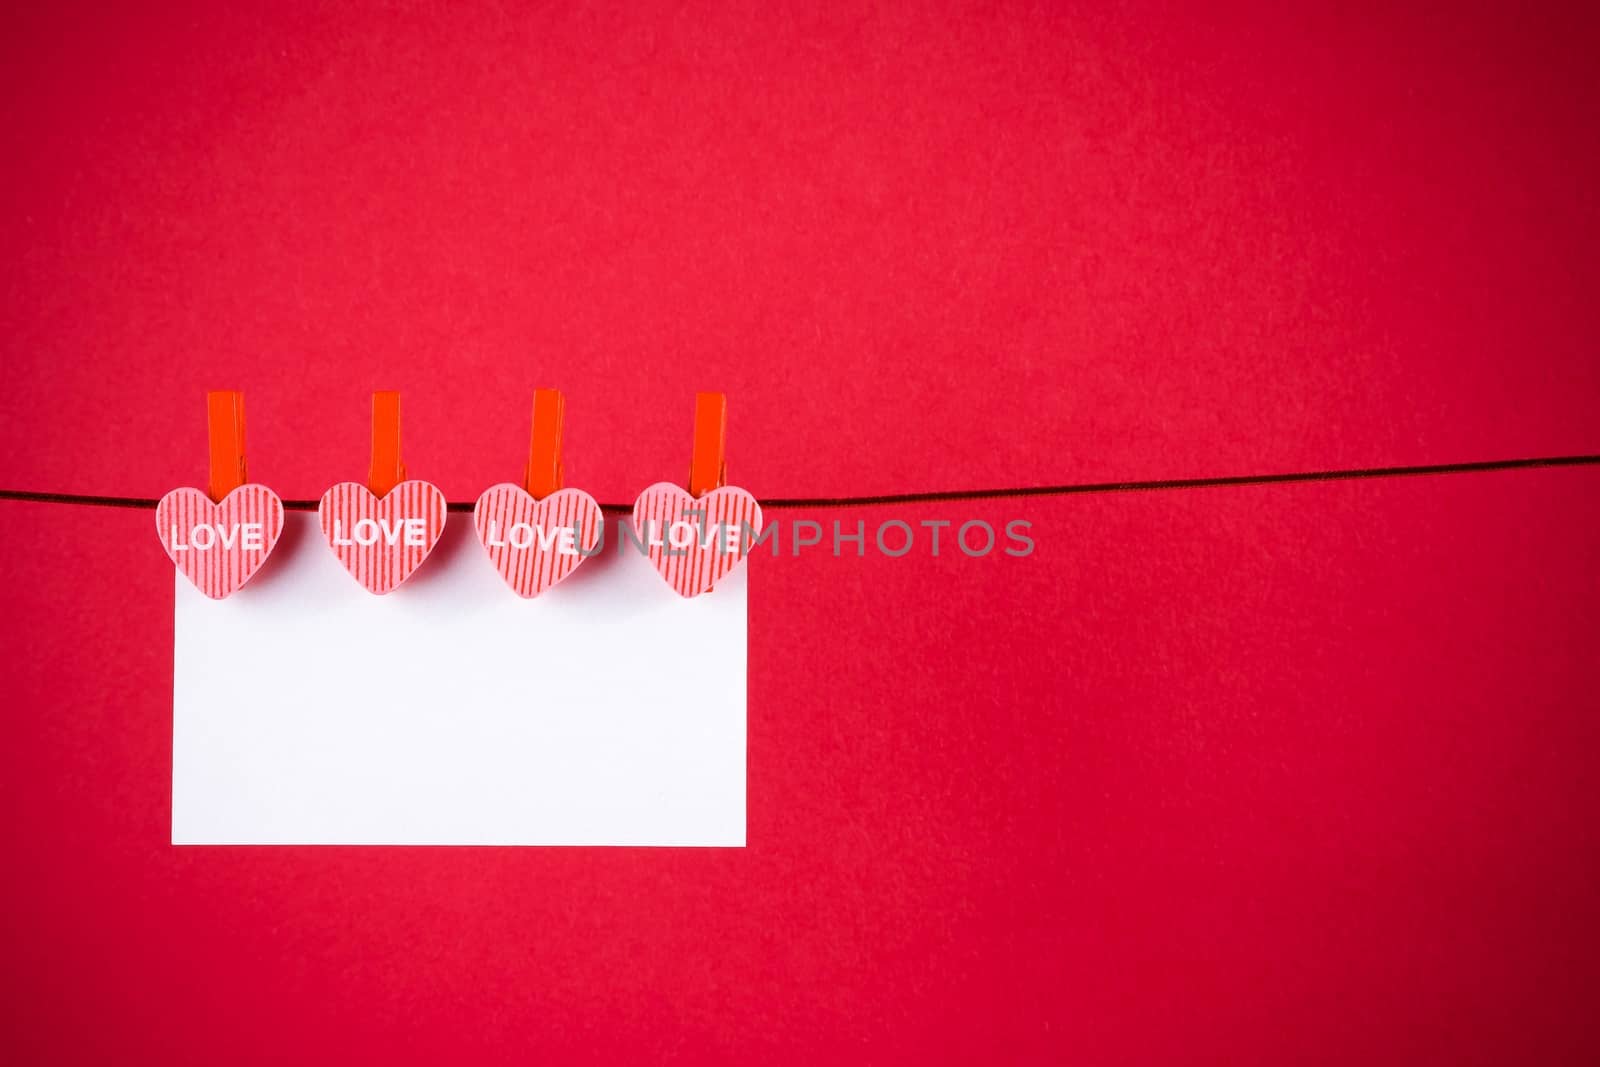 decorative red hearts with greeting card hanging on red background with space for text, concept of valentine day